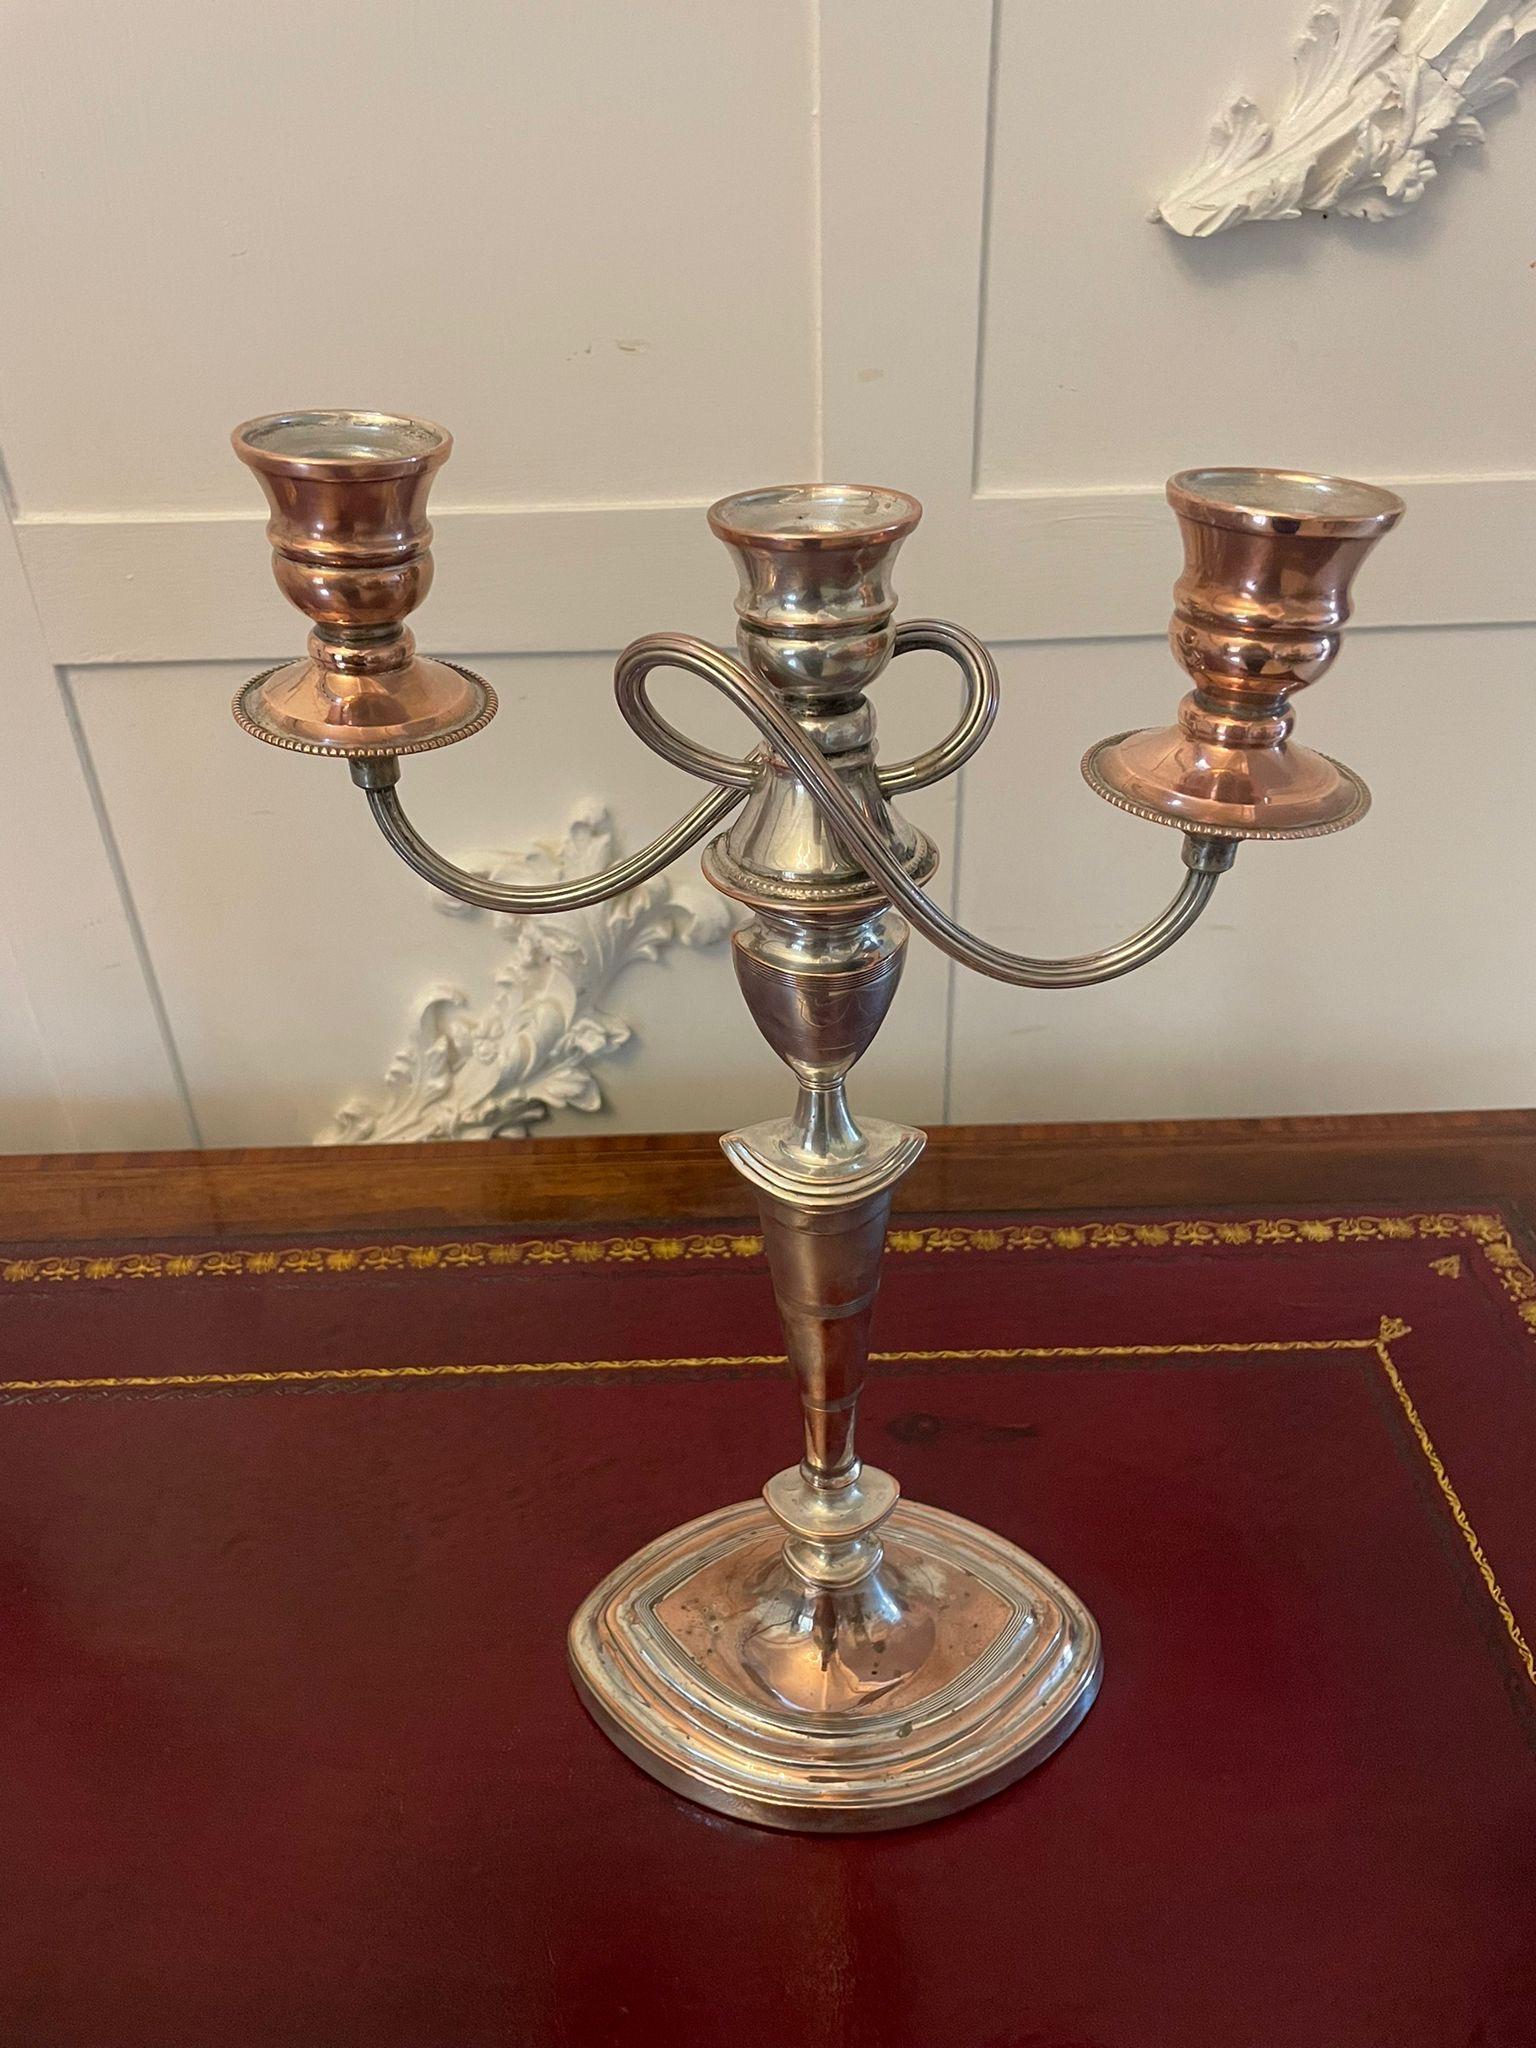  Pair of Antique Victorian Quality Sheffield Plated Candelabras  For Sale 2